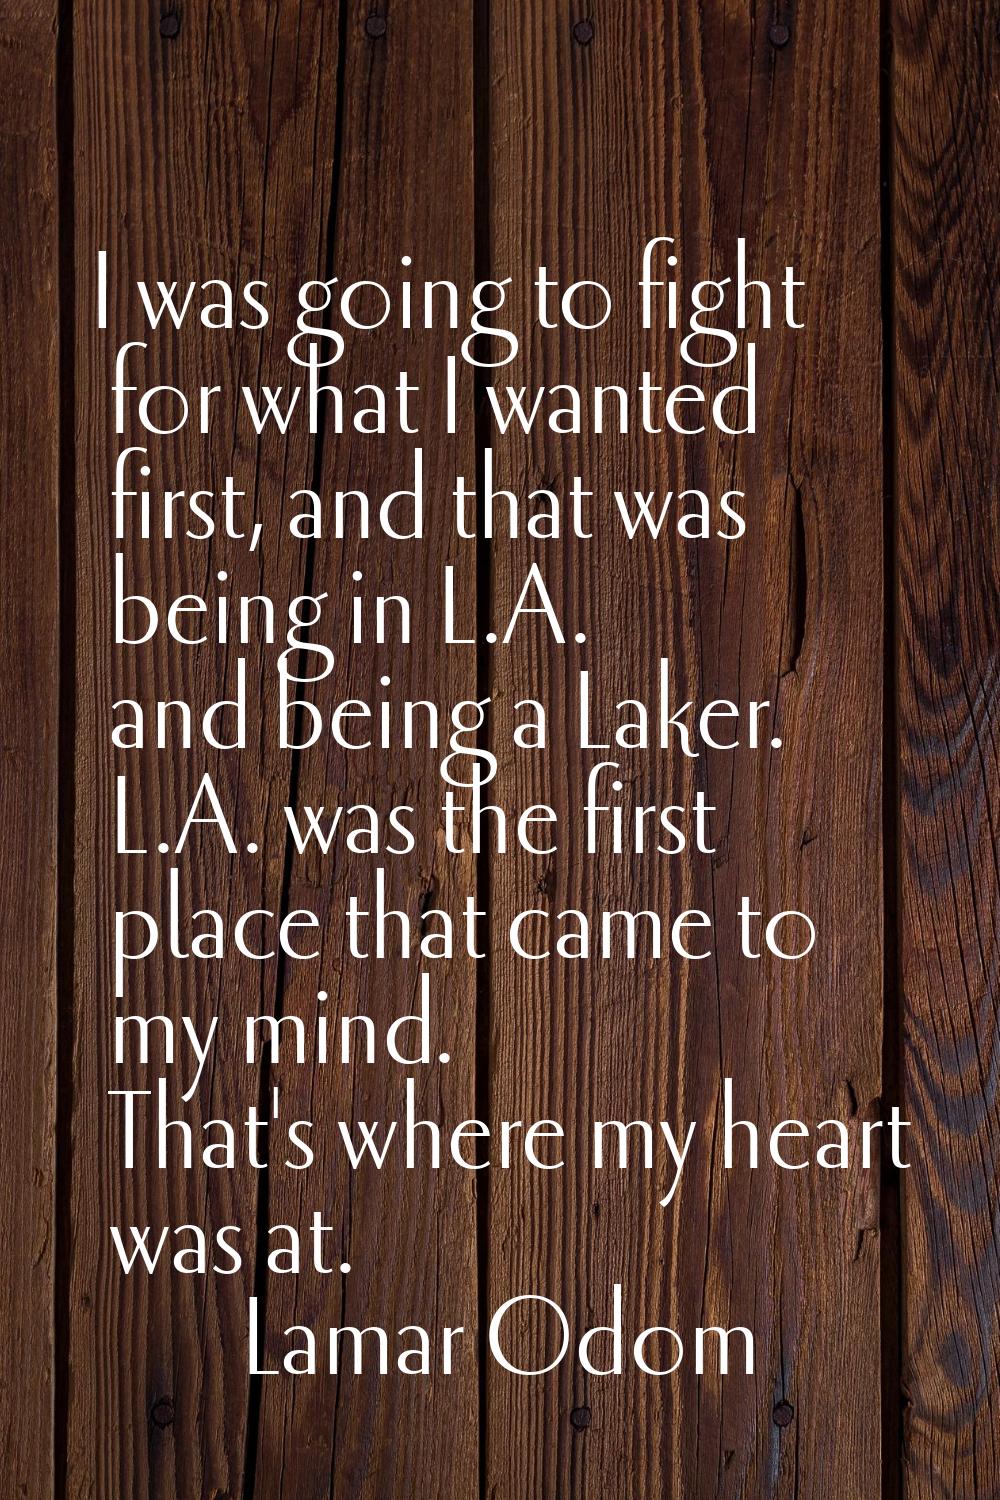 I was going to fight for what I wanted first, and that was being in L.A. and being a Laker. L.A. wa